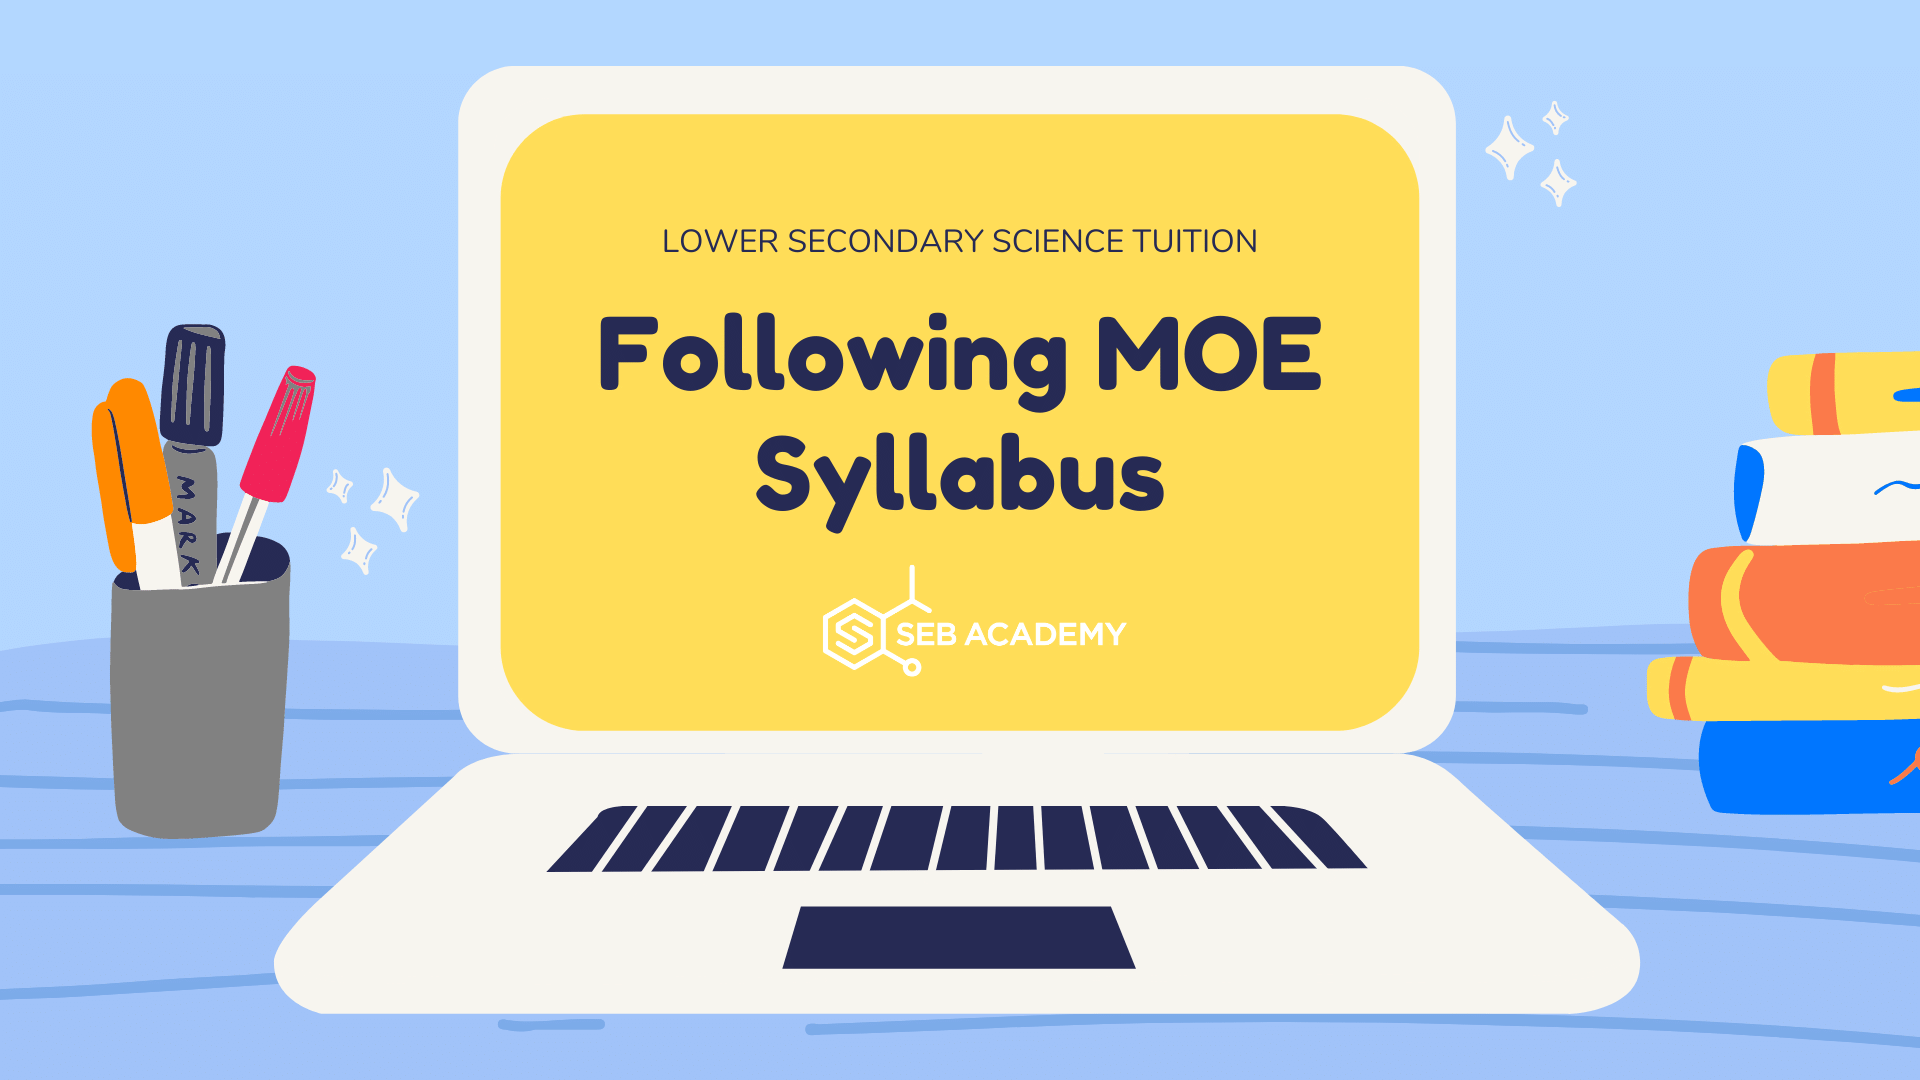 following MOE Syllabus lower secondary science tuition